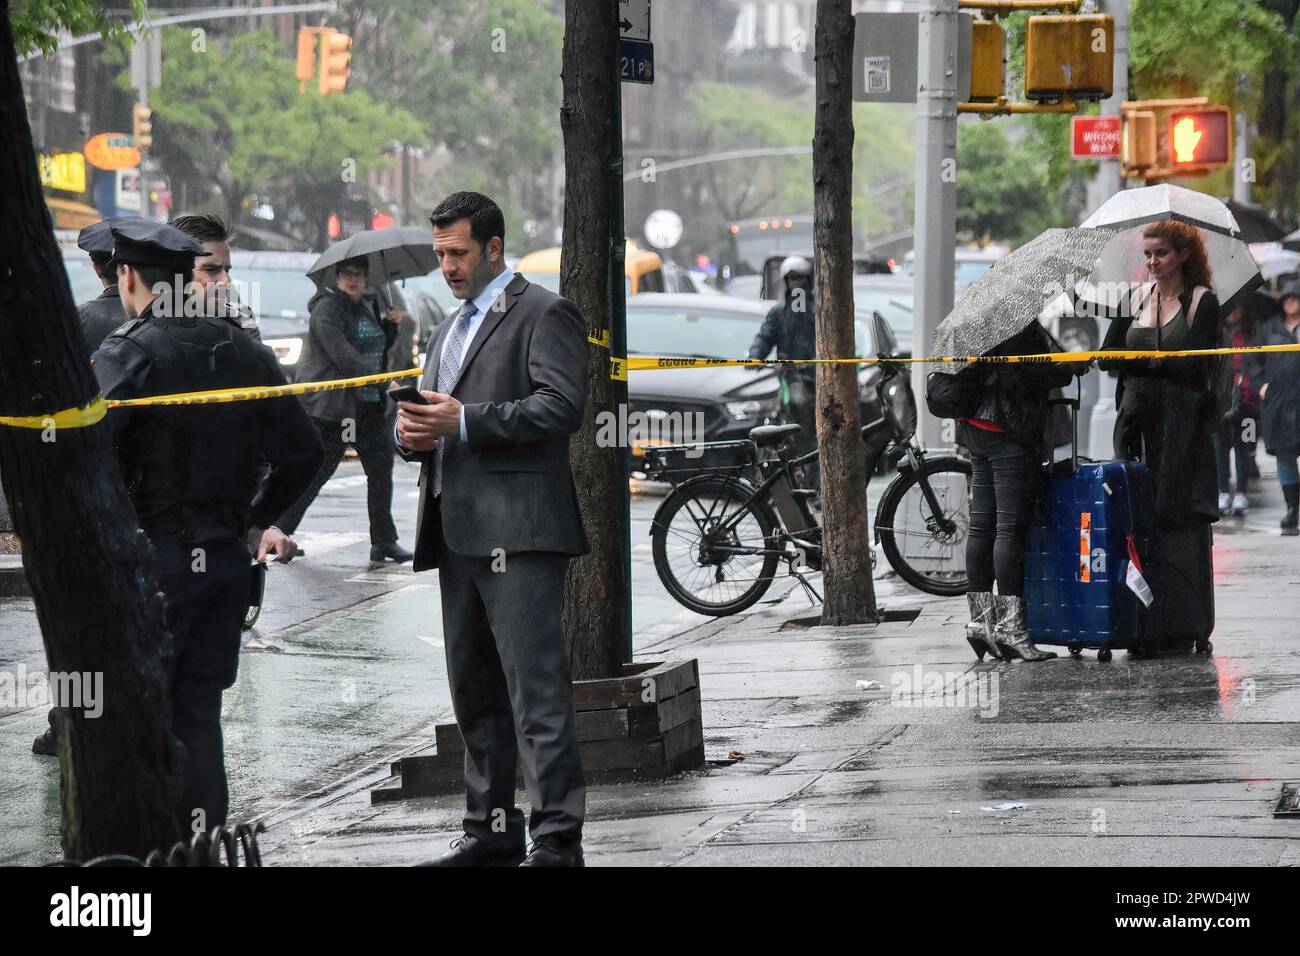 Manhattan, United States. 29th Apr, 2023. A man is showing a police officer some details on the phone during the investigation. Police investigate the shooting incident. Shooting in Manhattan, New York, United States on April 29, 2023. At 17:43 Saturday evening one person was shot in the hip and shoulder near the area of 9th Avenue and West 46th Street. According to the New York City Police Department, the person shot is in stable condition. No suspects are captured at this time. (Photo by Kyle Mazza/SOPA Images/Sipa USA) Credit: Sipa USA/Alamy Live News Stock Photo